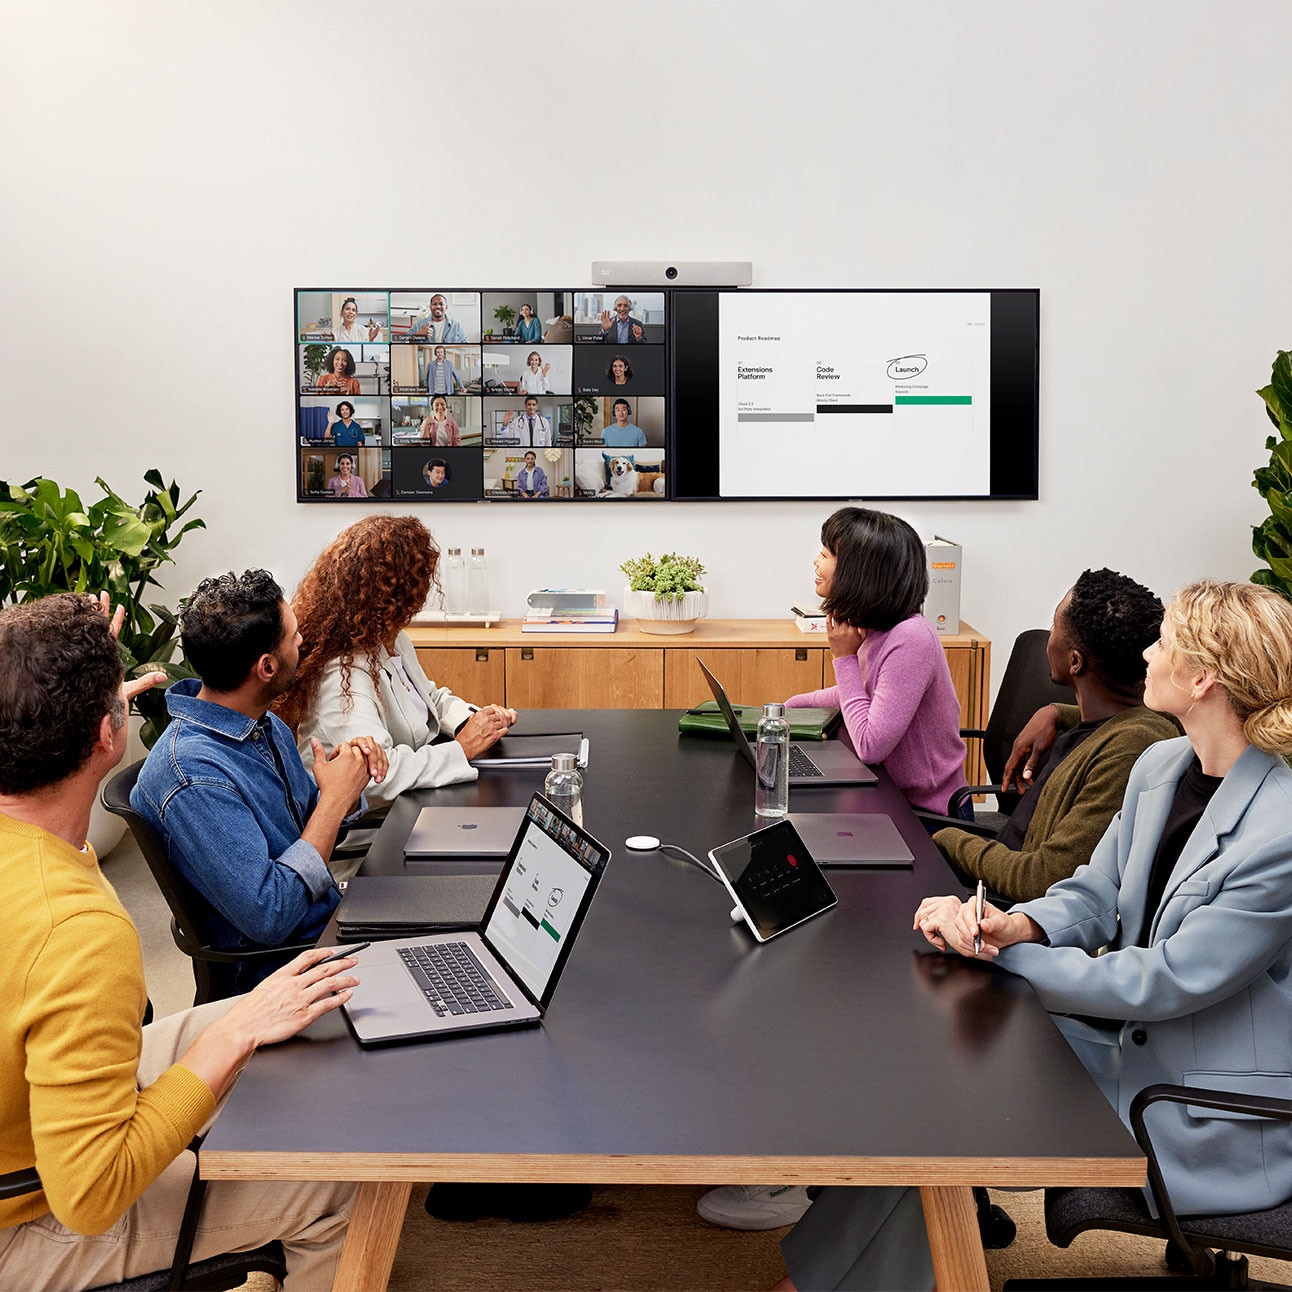 6 colleagues collaborate in a conference room, video conferencing and content sharing with several remote colleagues using the Cisco Room Bar video bar.